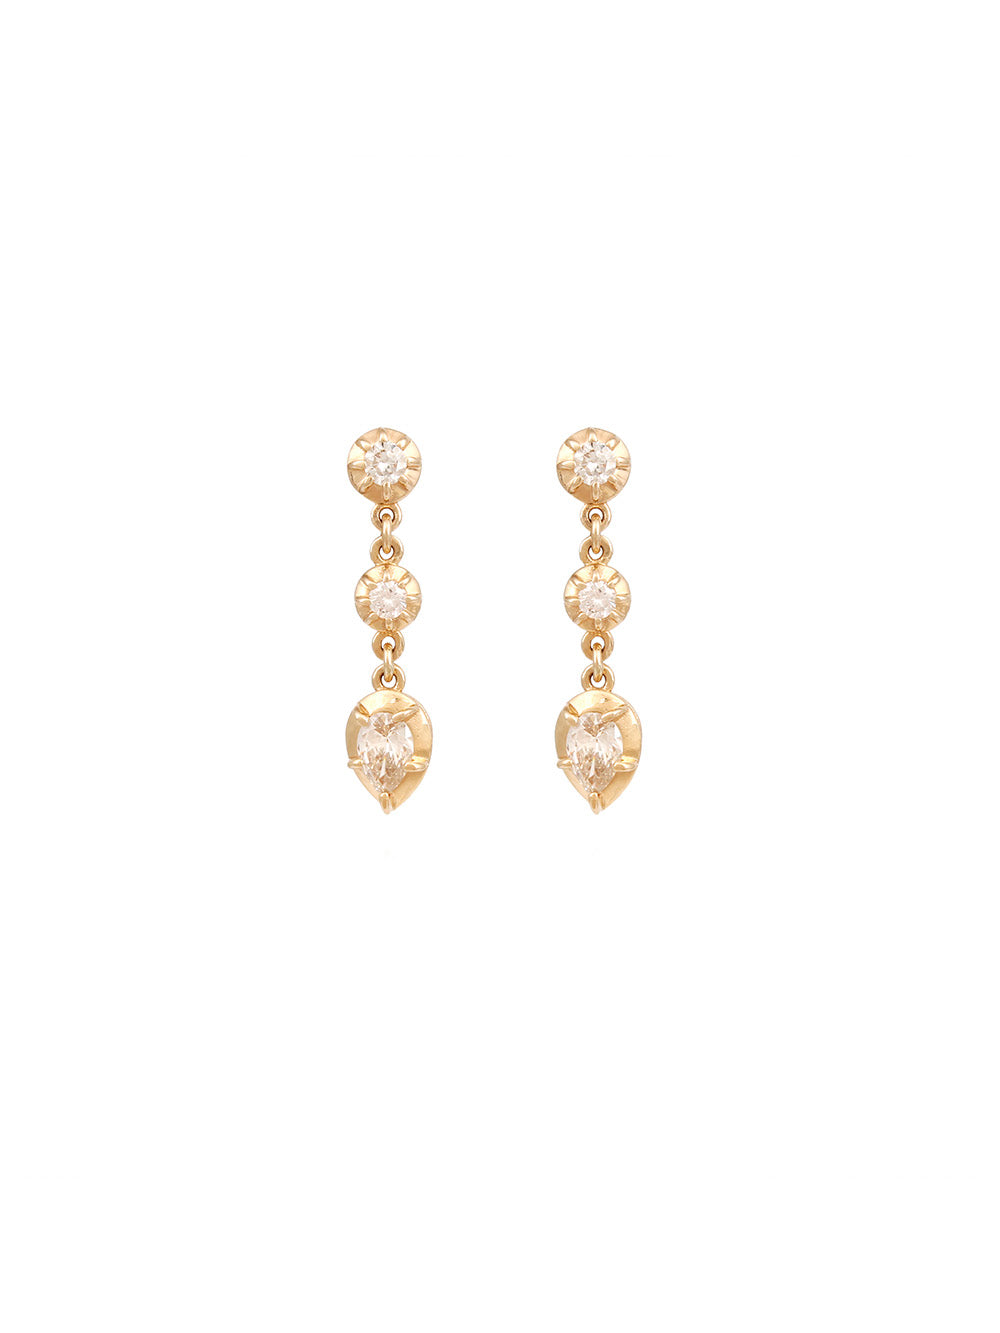 ROUND EARRINGS AND DIAMOND DROPS